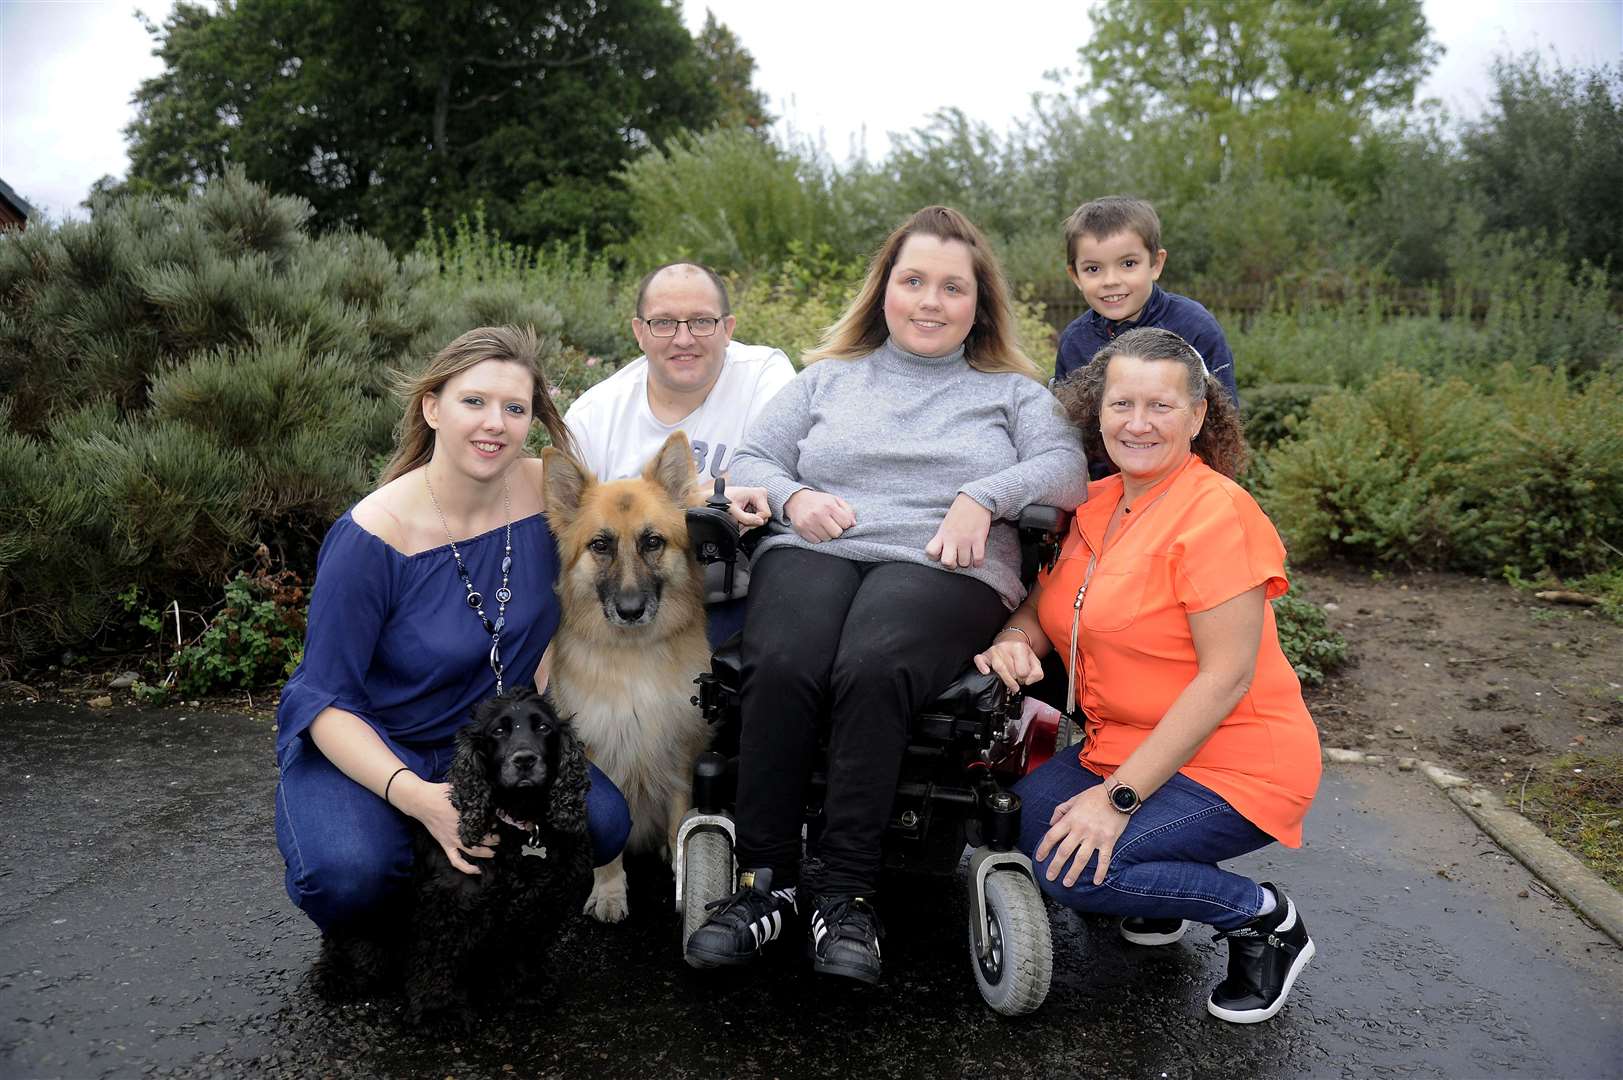 Carly and Gavin McConnachie, Chloe O’Hare, Gavin’s son Cameron and Brenda Macdonald, with their dogs Poppy and Gucci.